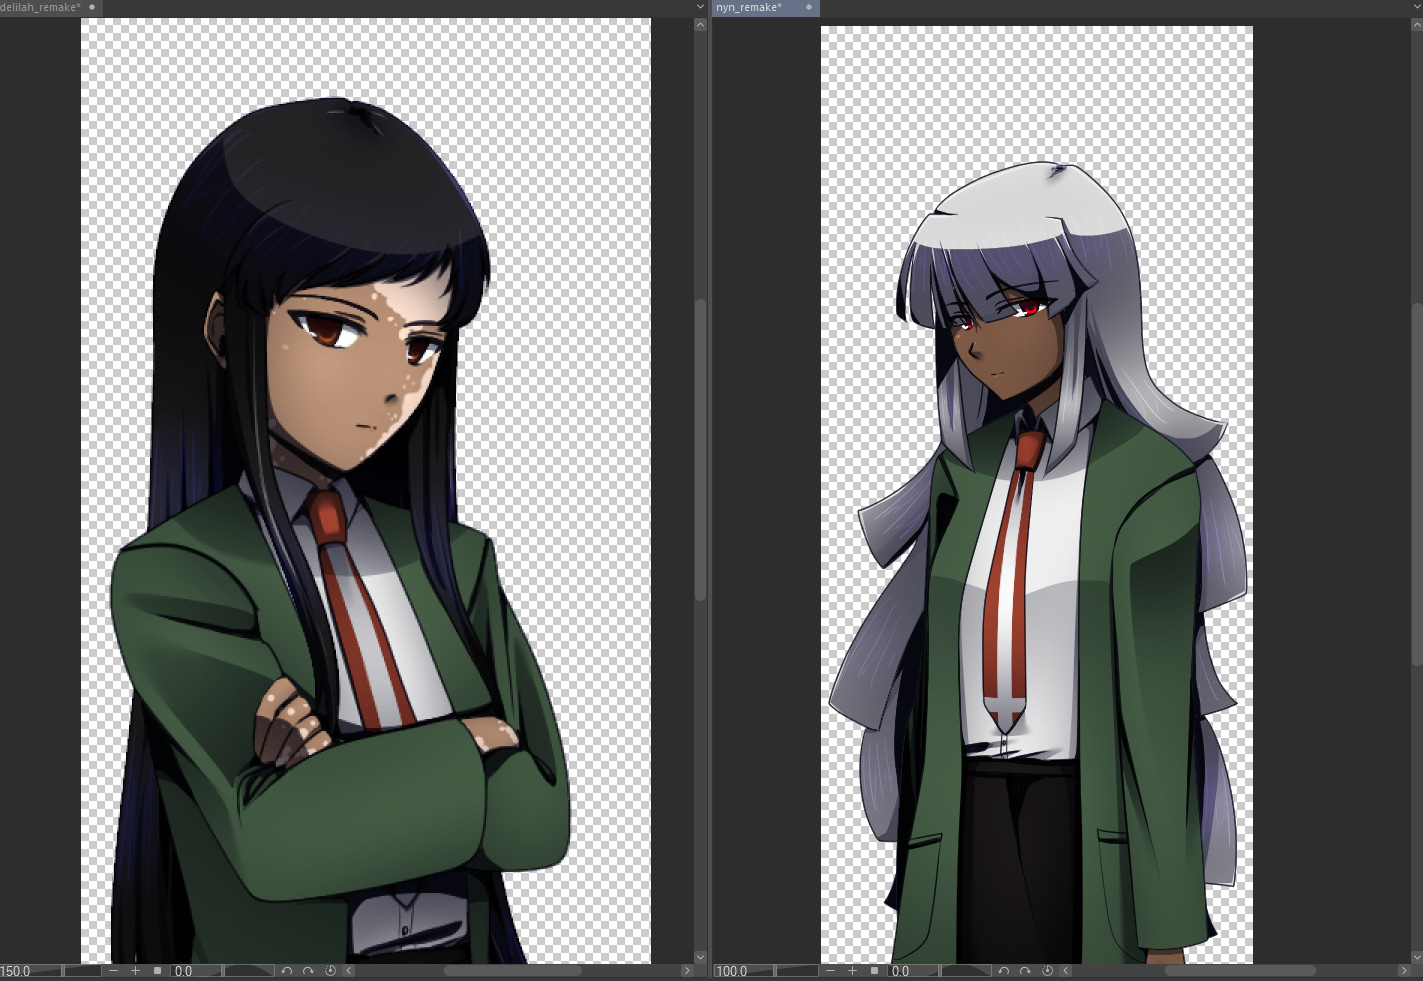 clip studio canvases for delilah and nyn's remade sprites